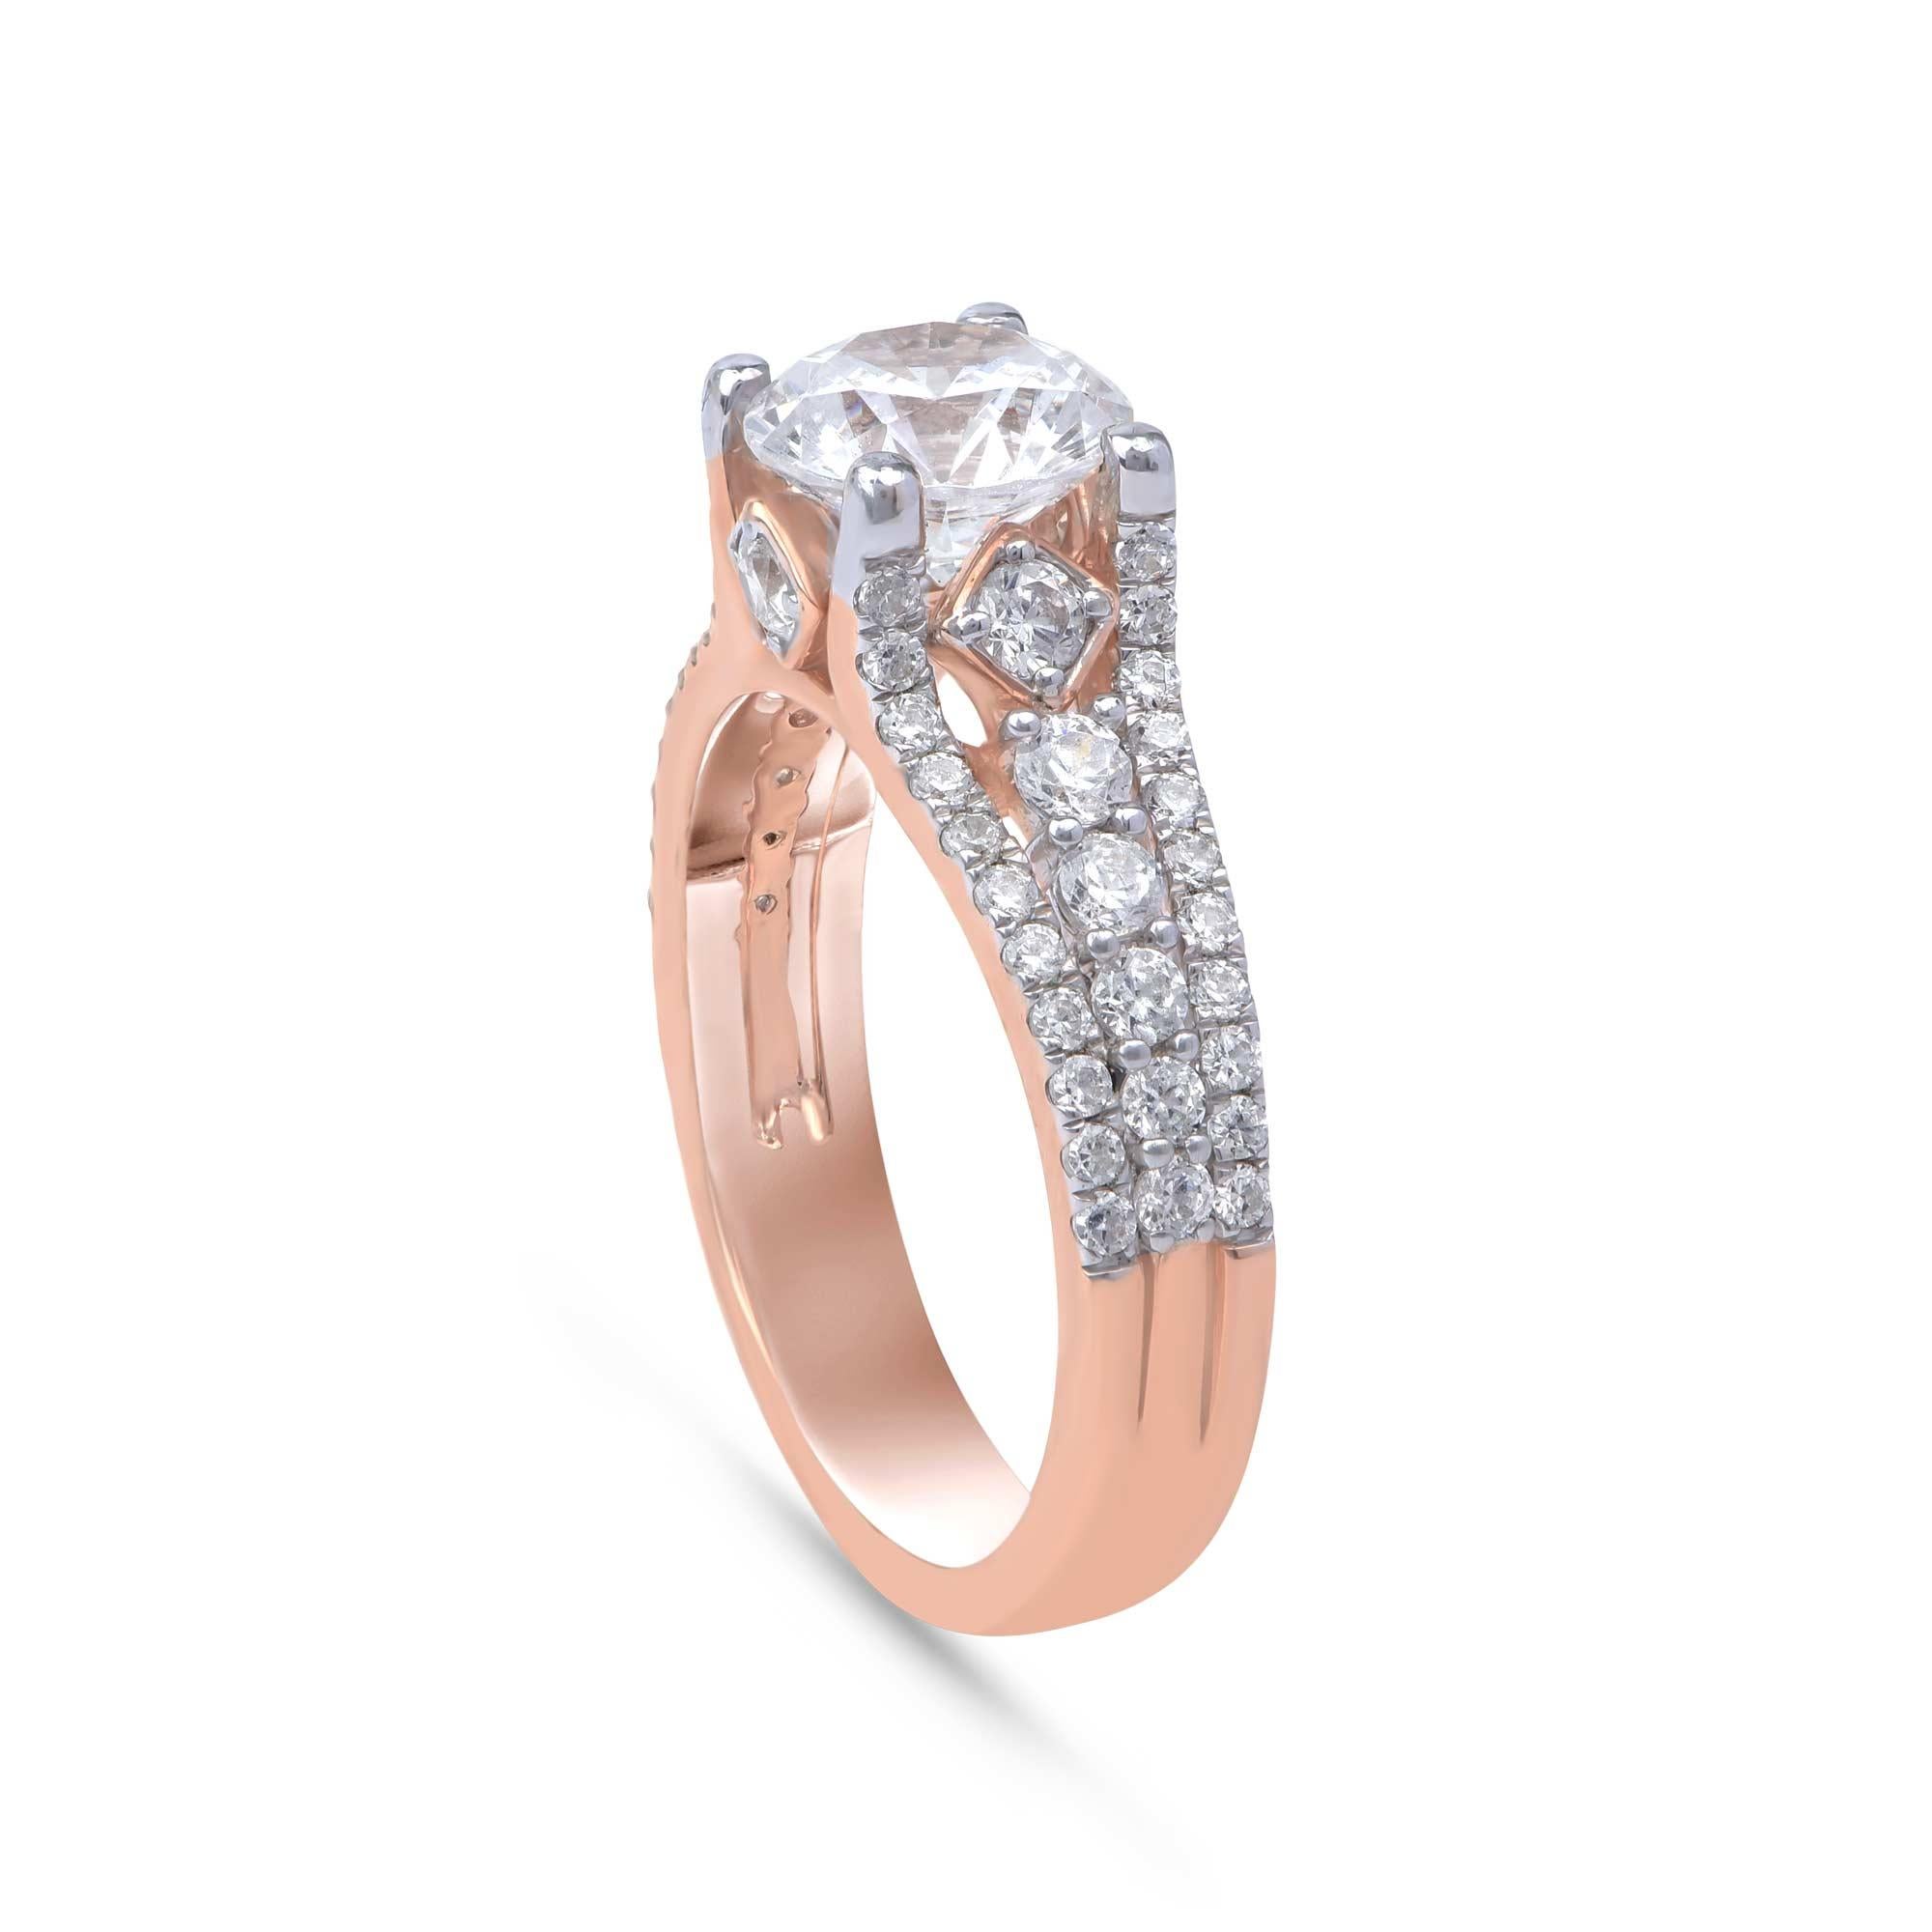 A modern makeover for a classic design, this diamond engagement ring is expertly handcrafted by skillful craftsmen in 18 karat rose gold and accentuated with 59 natural round diamonds set in prong and micro-prong setting. The diamonds are graded H